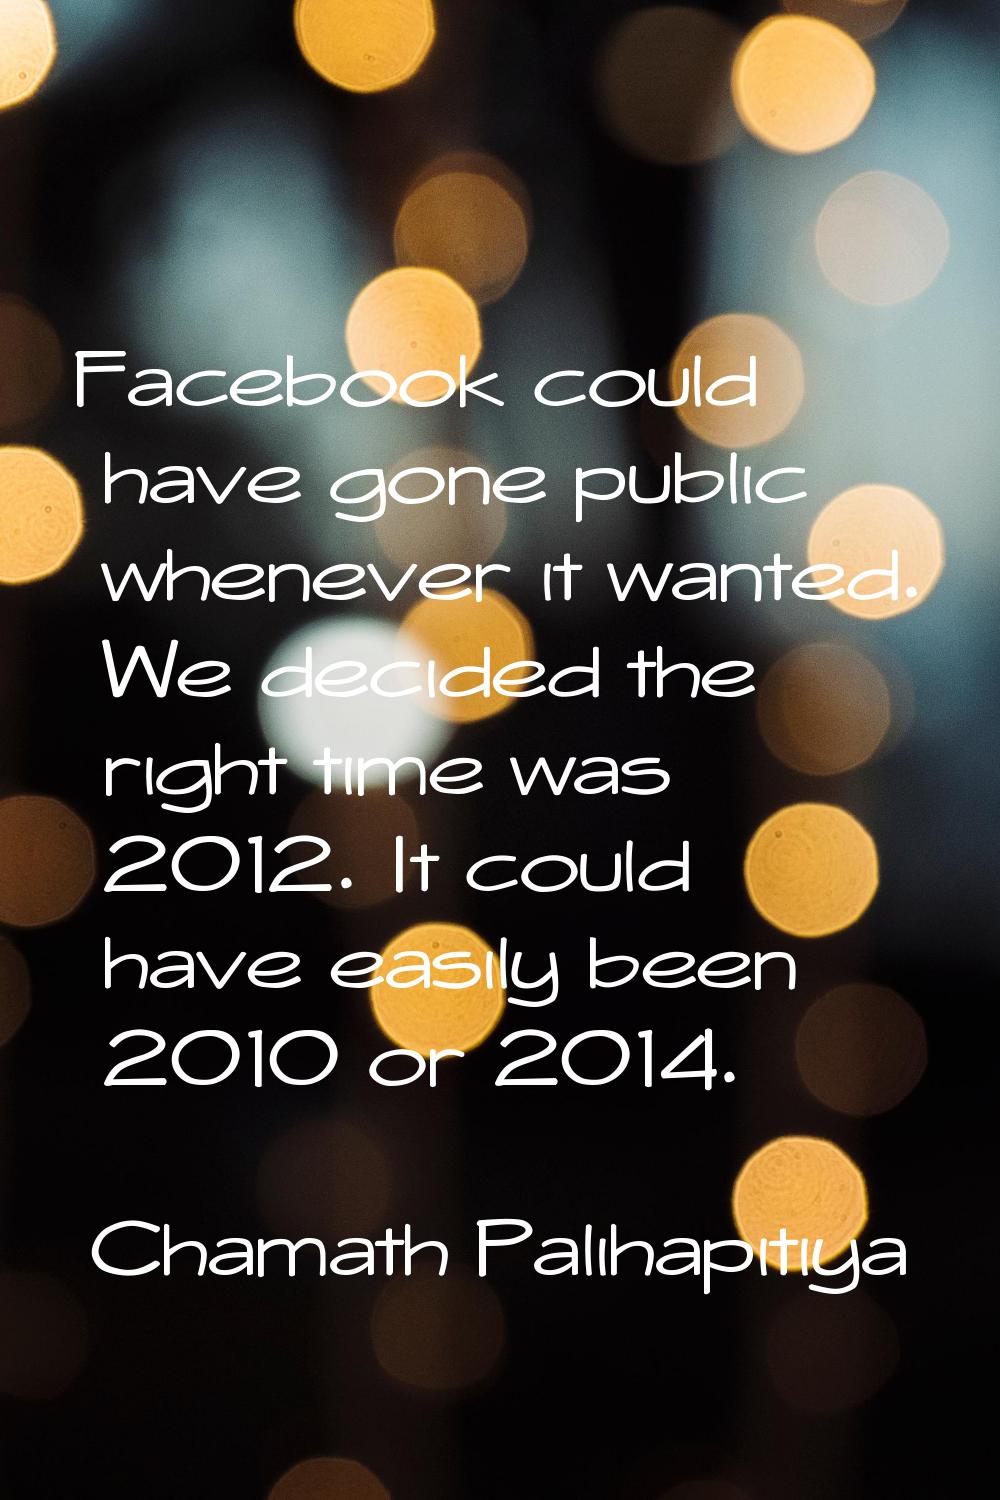 Facebook could have gone public whenever it wanted. We decided the right time was 2012. It could ha